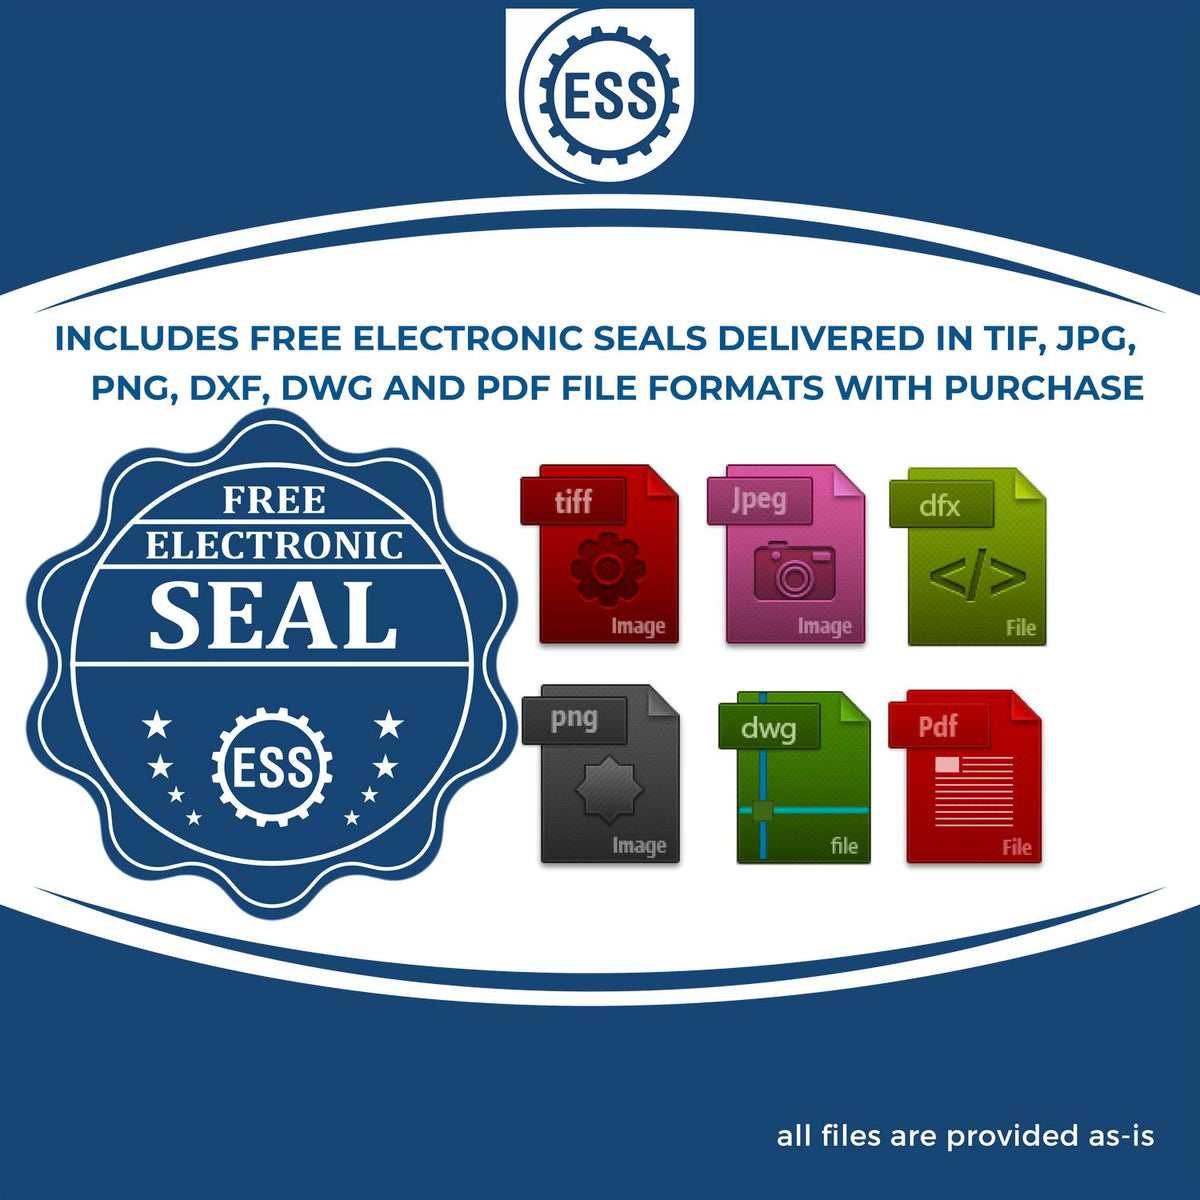 An infographic for the free electronic seal for the State of Wyoming Extended Long Reach Engineer Seal illustrating the different file type icons such as DXF, DWG, TIF, JPG and PNG.